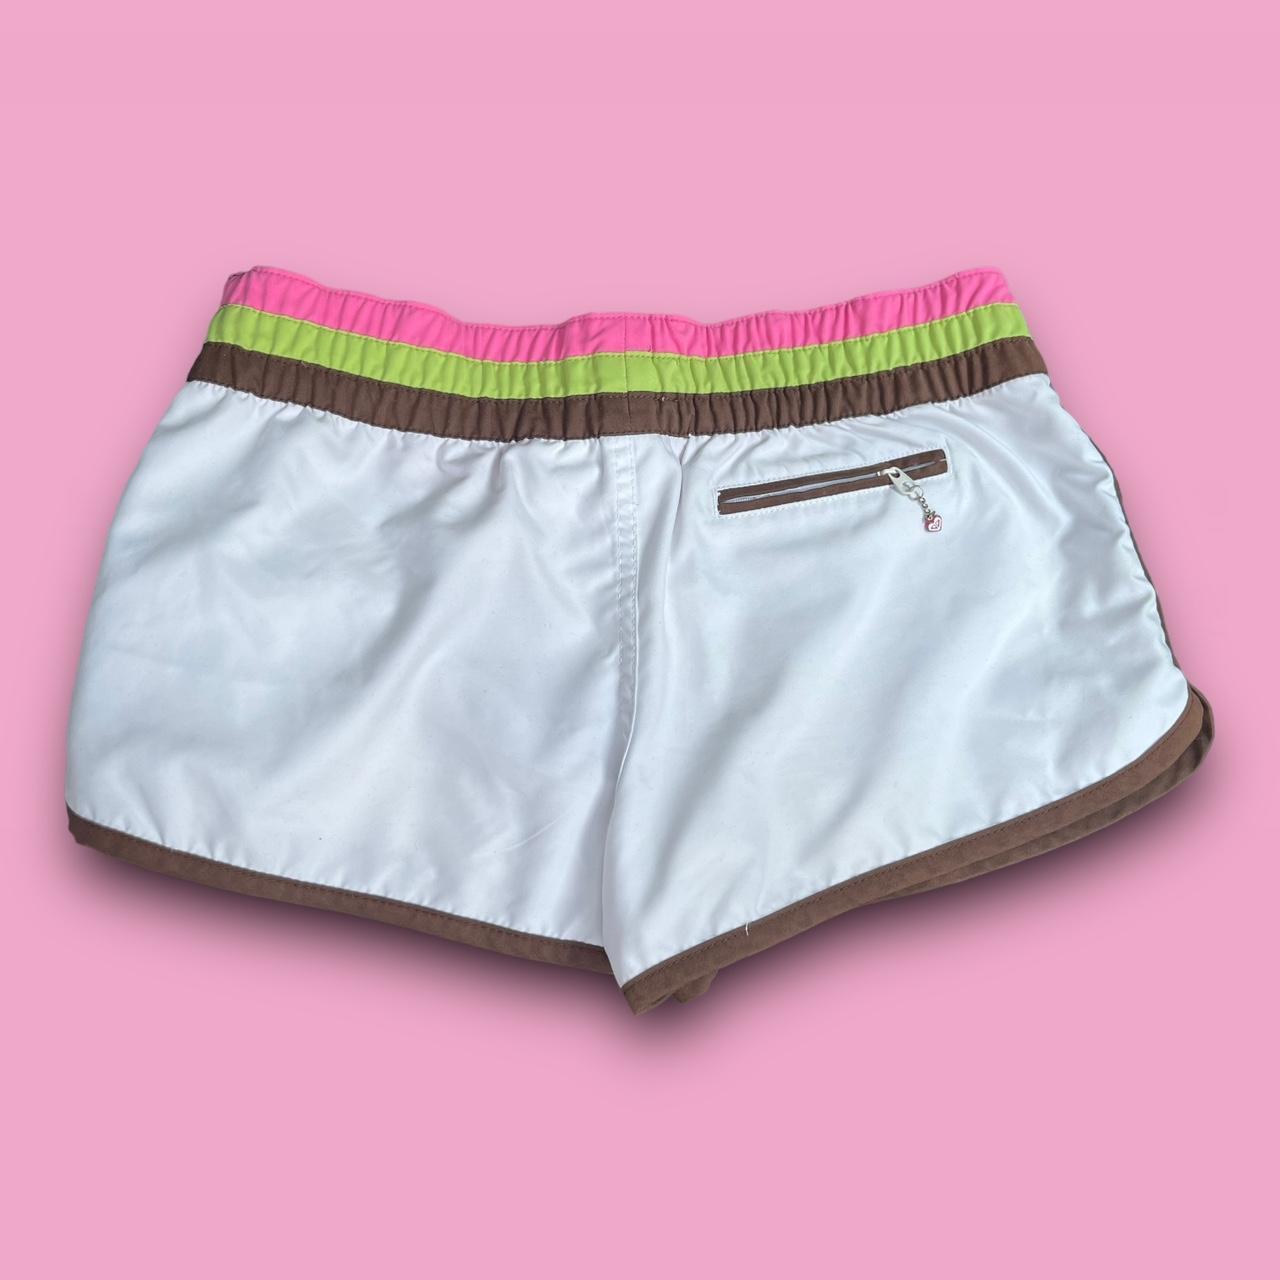 Roxy Women's White and Pink Shorts (6)